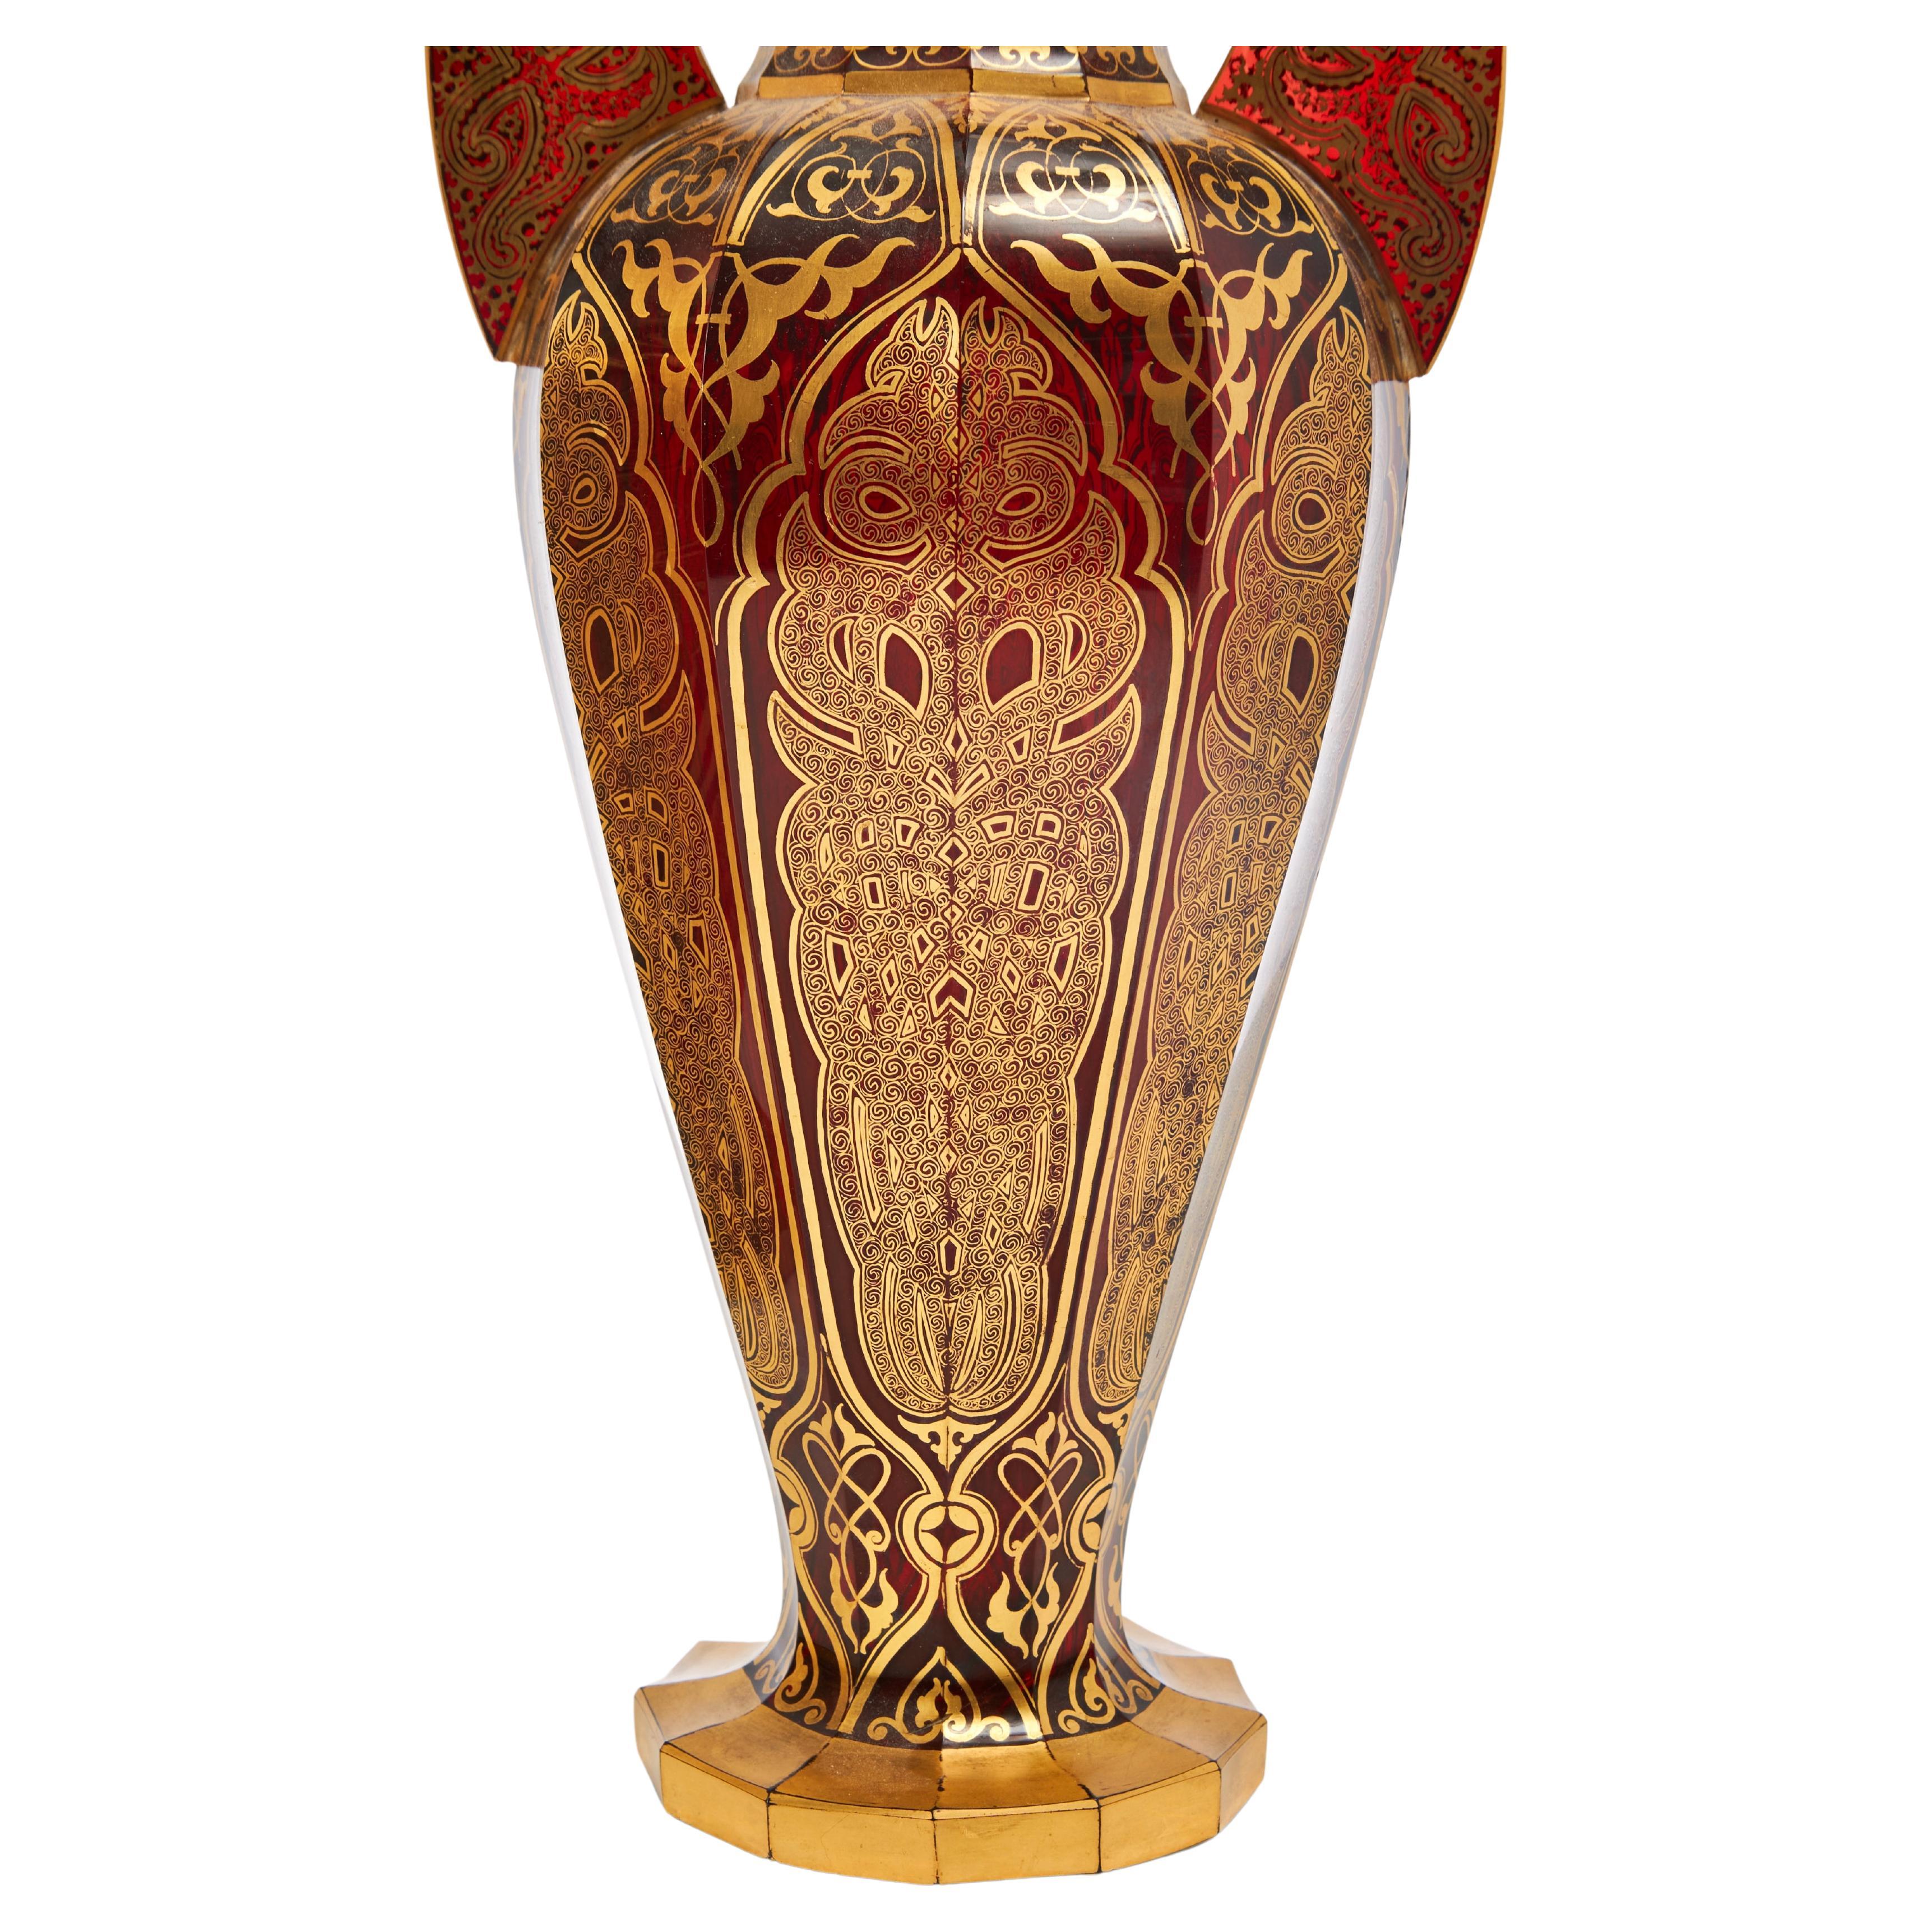 An exceptional Bohemian Harrach glass vase in Islamic design and gilding decoration all around

Hight 50 cm

Provenance: According to information: Kayser Wilhelm II (Purchased at auction after Schloss Wilhelmina, 1919 by the submitter's